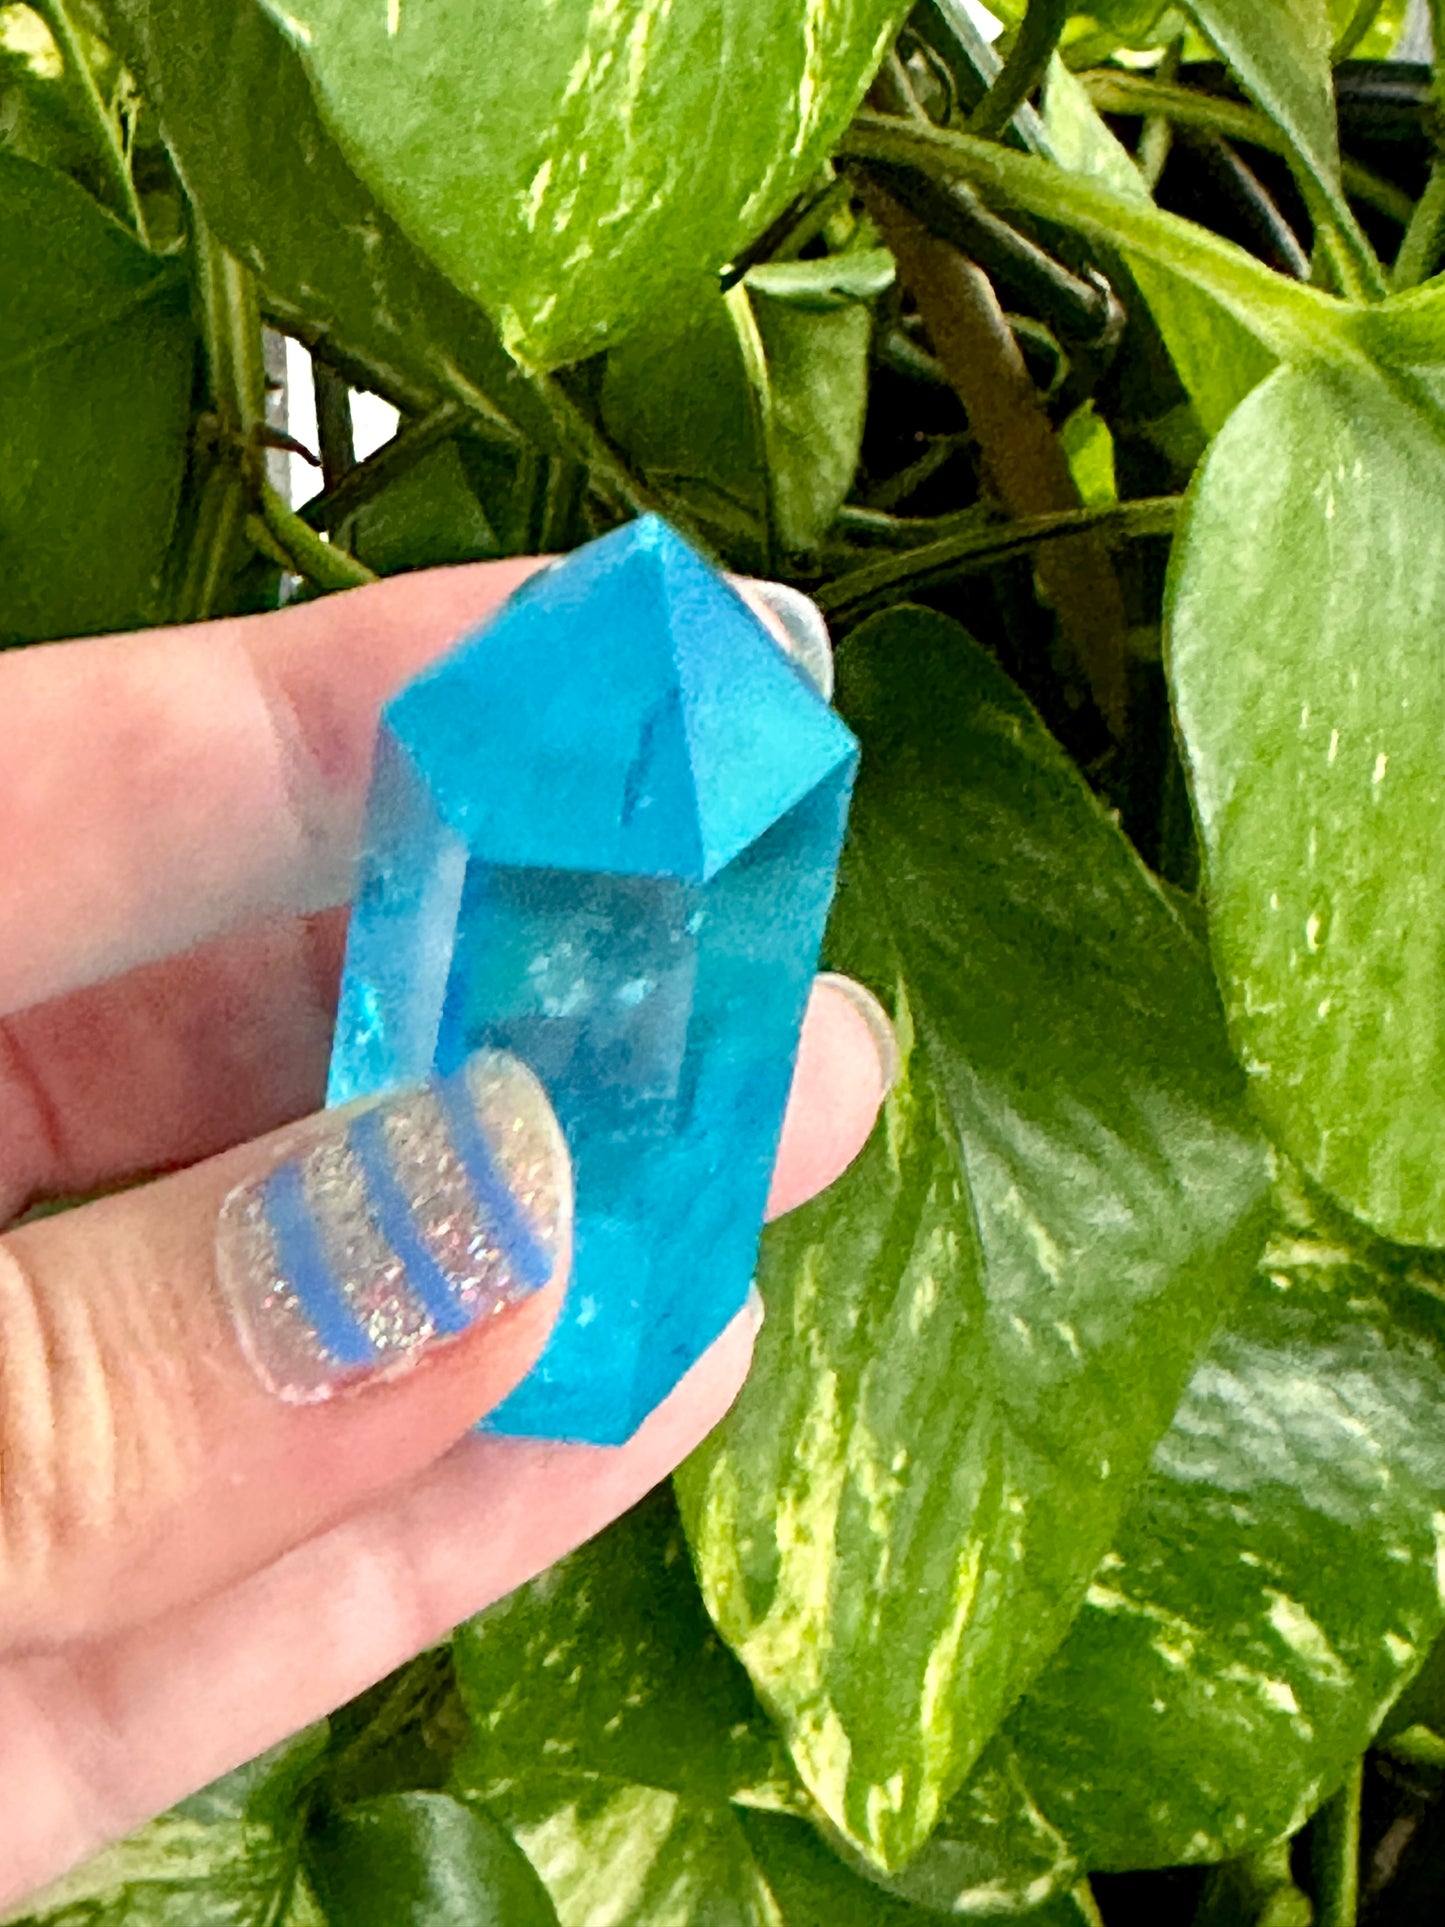 Blue Aura Quartz Tower - Majestic Crystal Point for Clarity & Communication, Handcrafted Gemstone Obelisk, Ethereal Energy Decor Piece